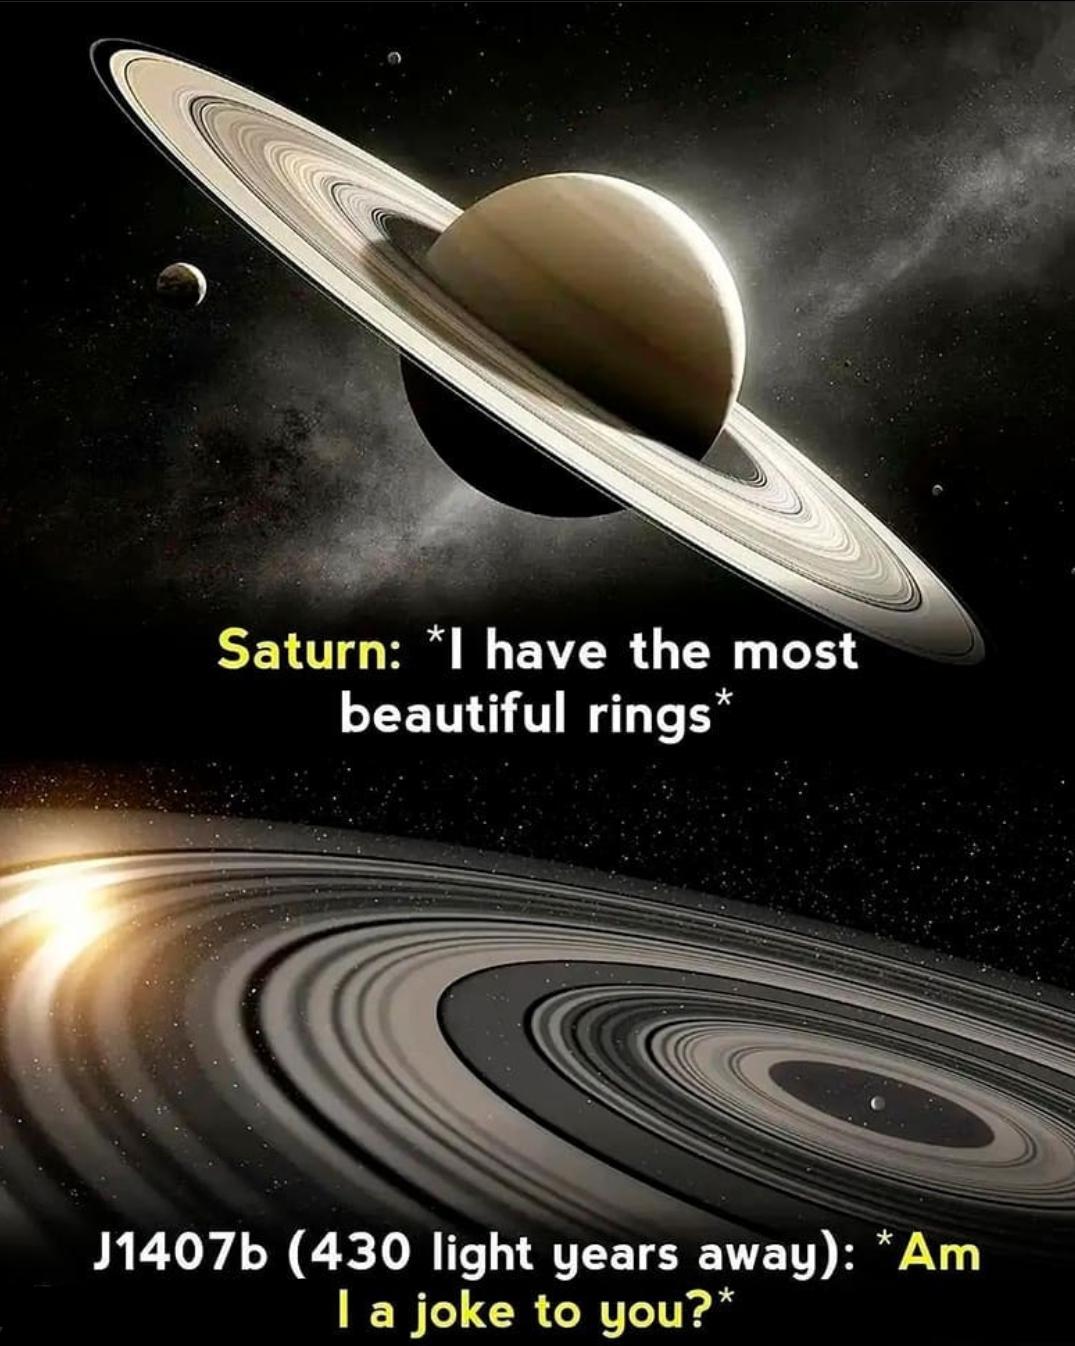 saturn planet - Saturn I have the most beautiful rings J1407b 430 light years away Am I a joke to you?